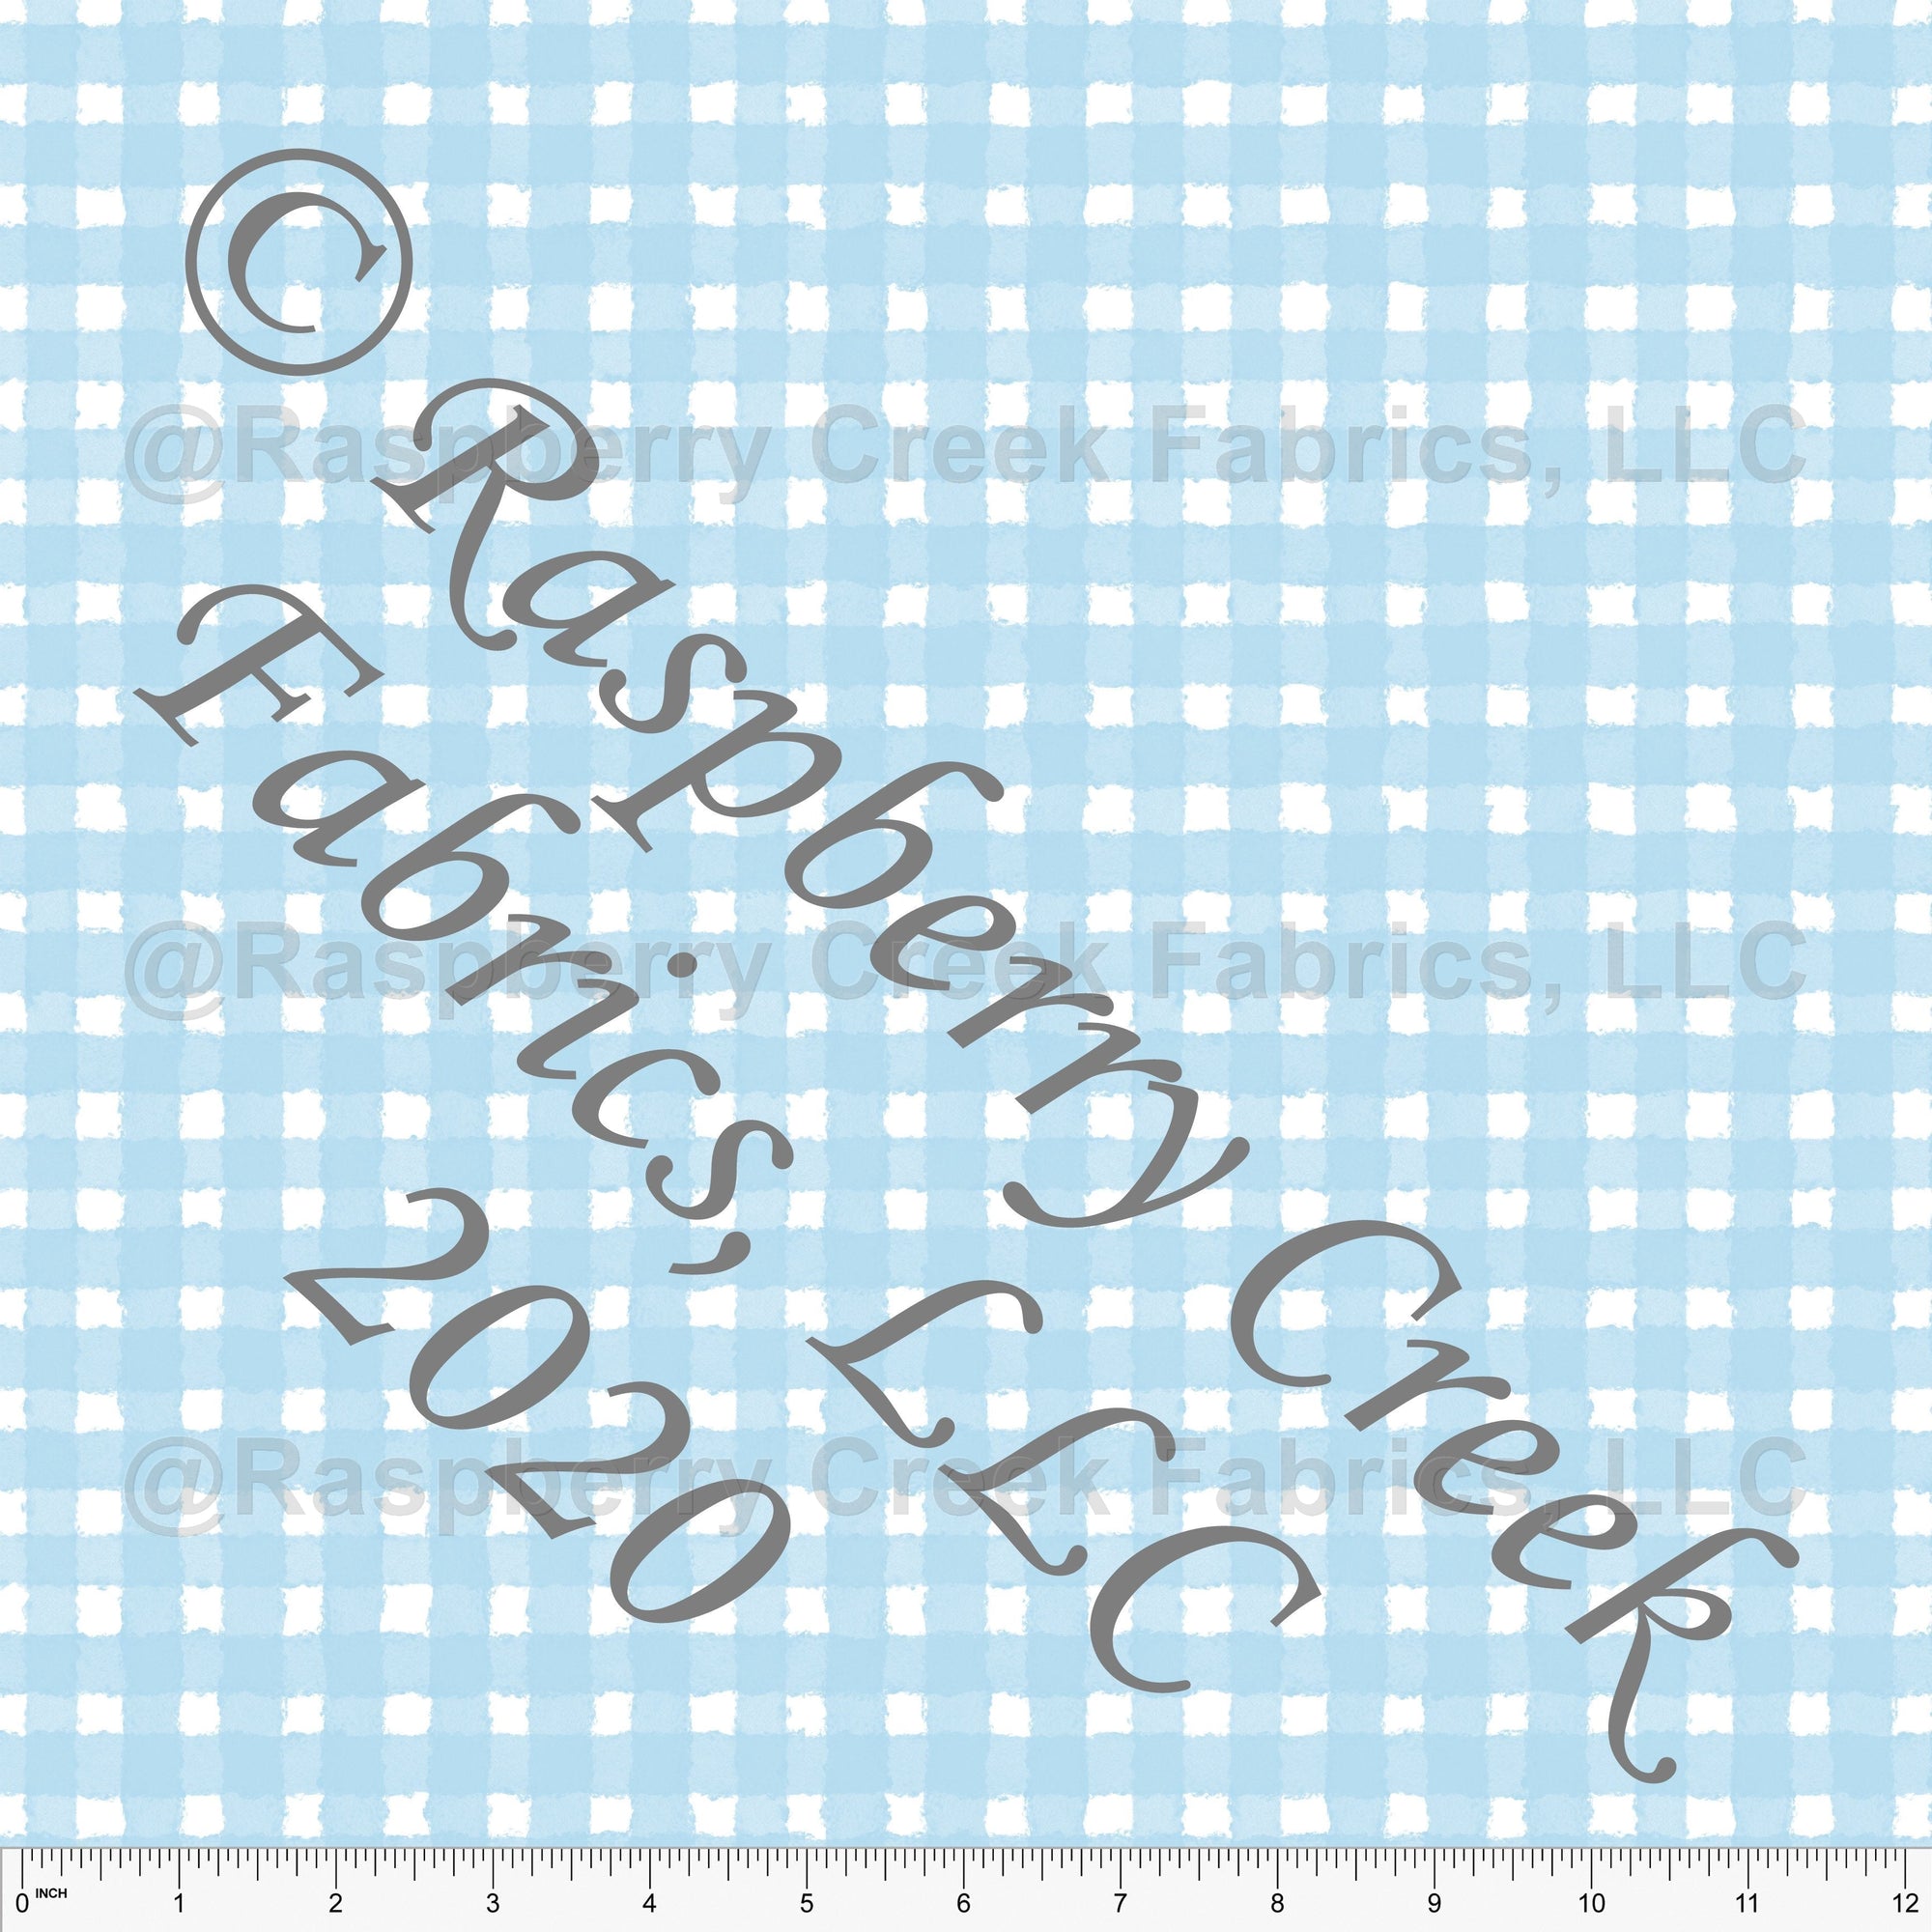 Light Blue and White Painted Check Gingham, By Bri Powell for Club Fabrics Fabric, Raspberry Creek Fabrics, watermarked